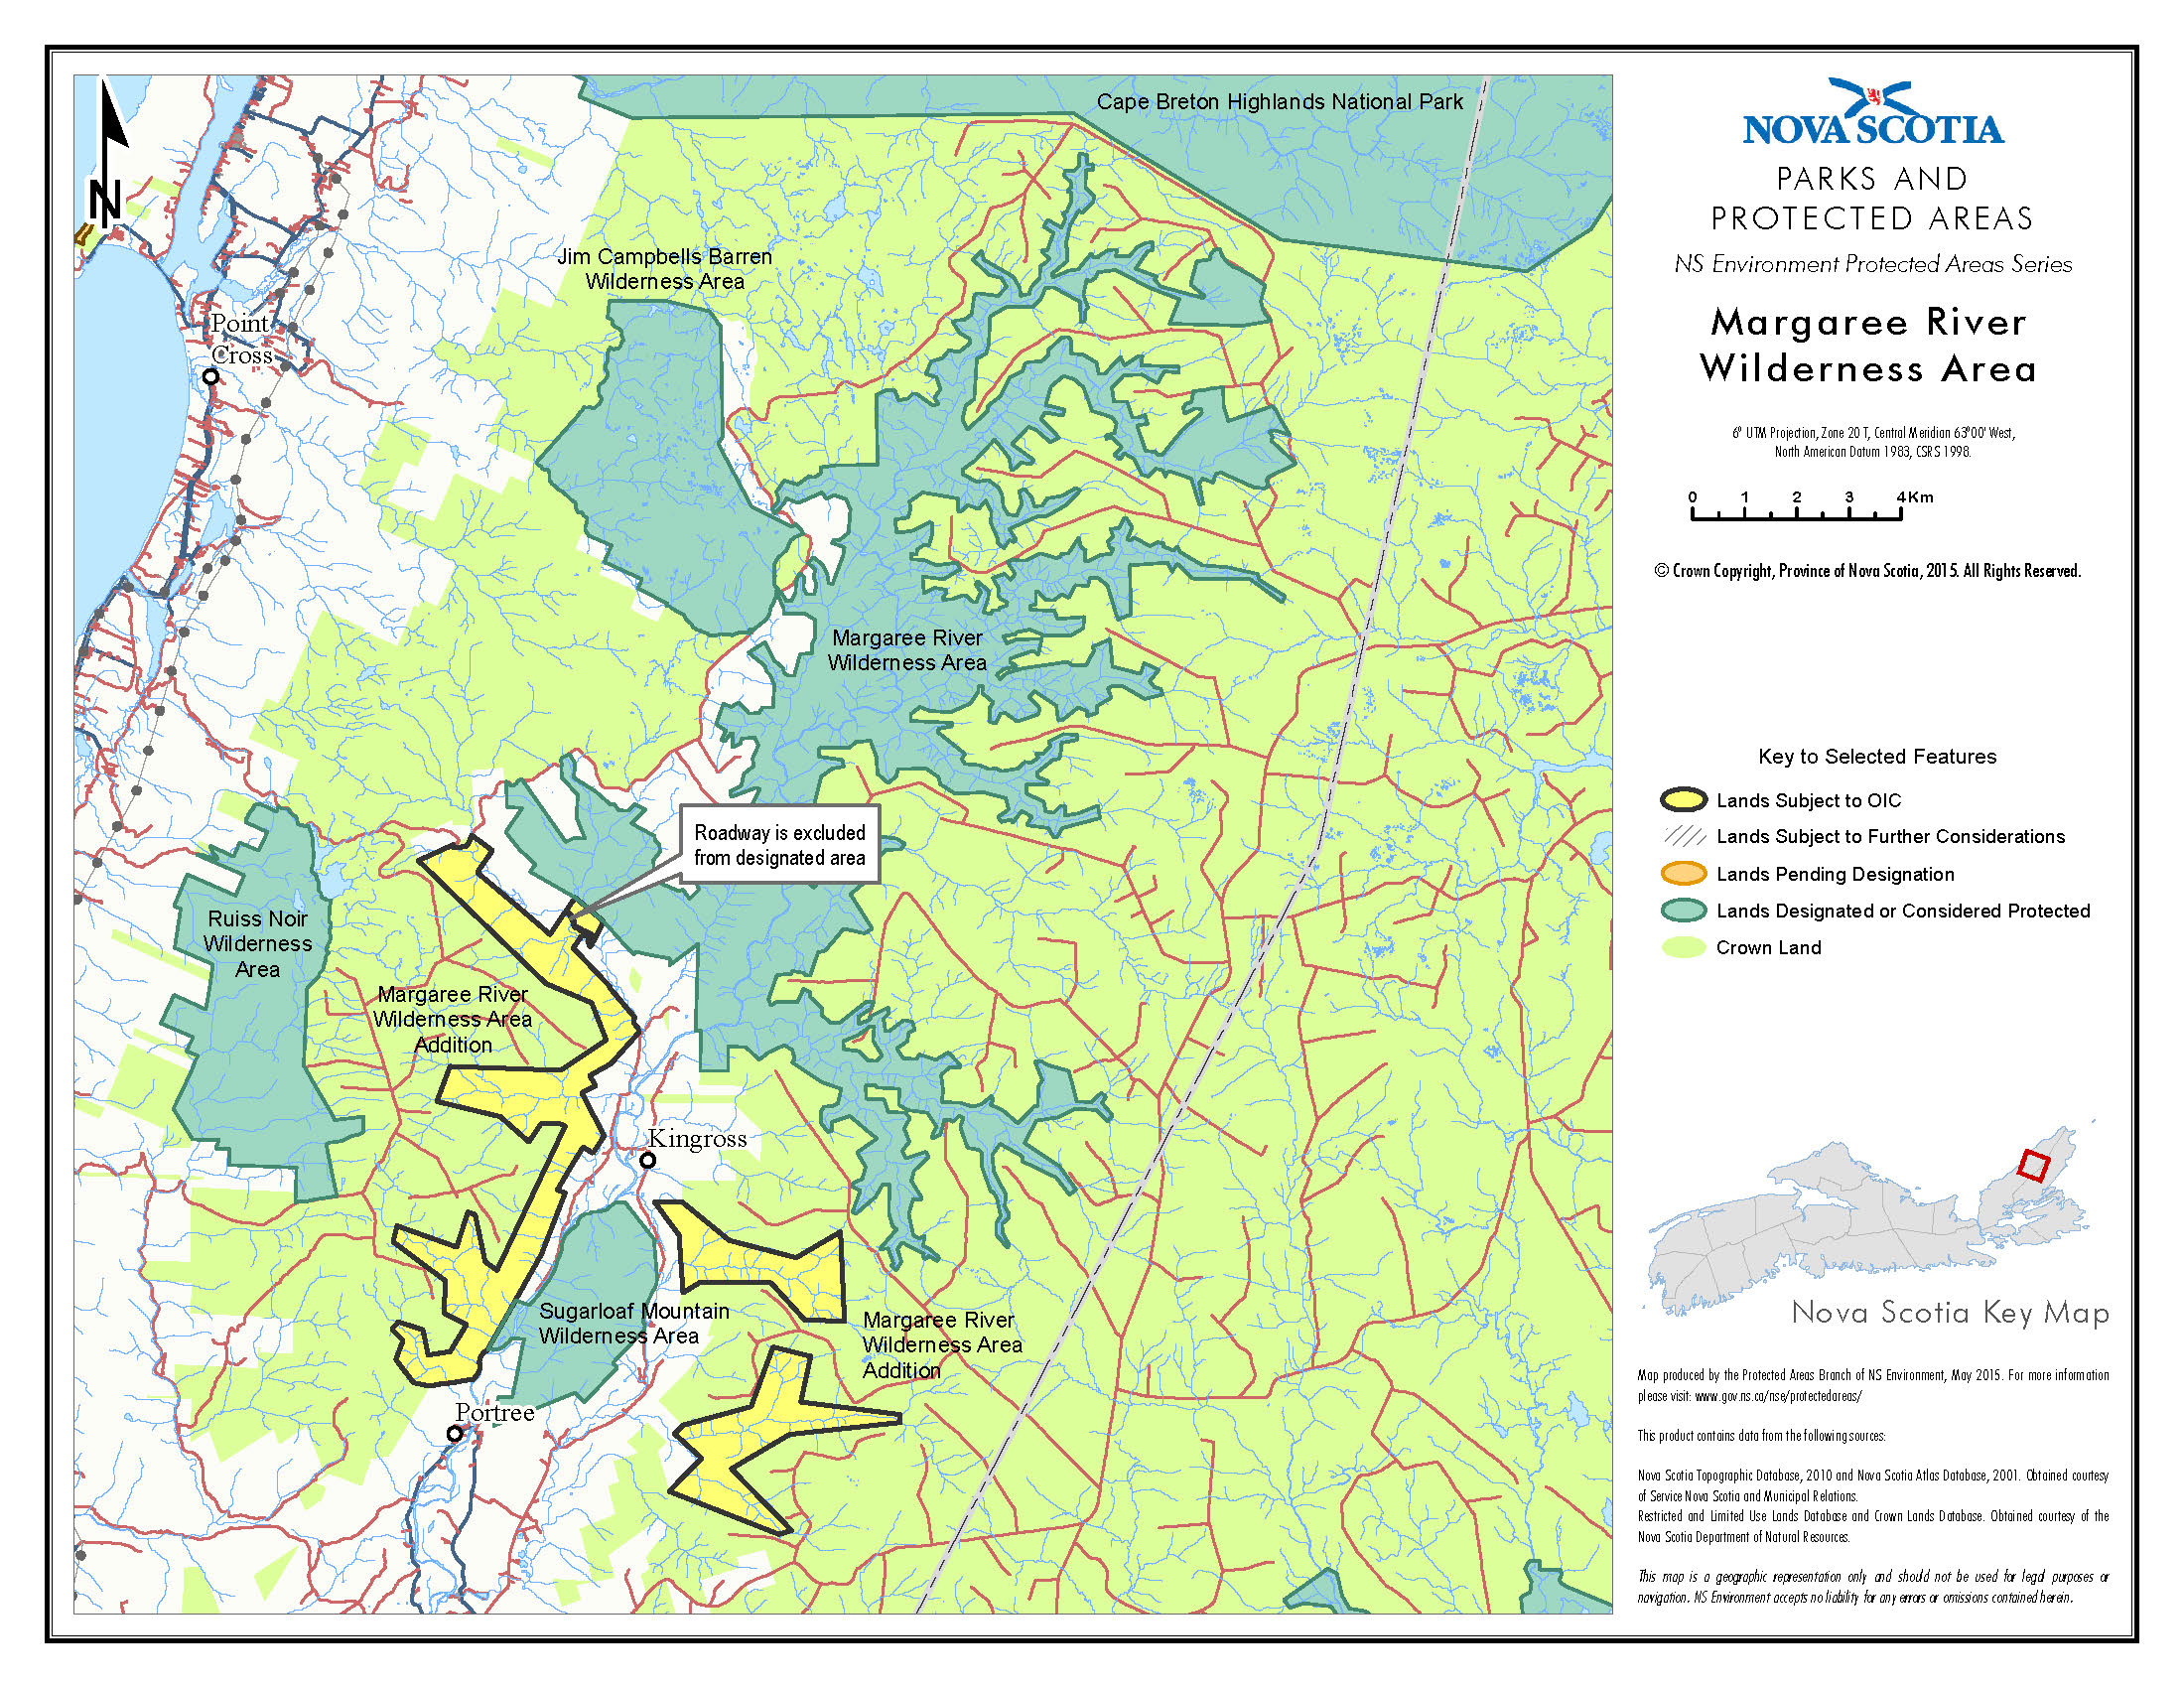 Approximate boundaries of addition to Margaree River Wilderness Area